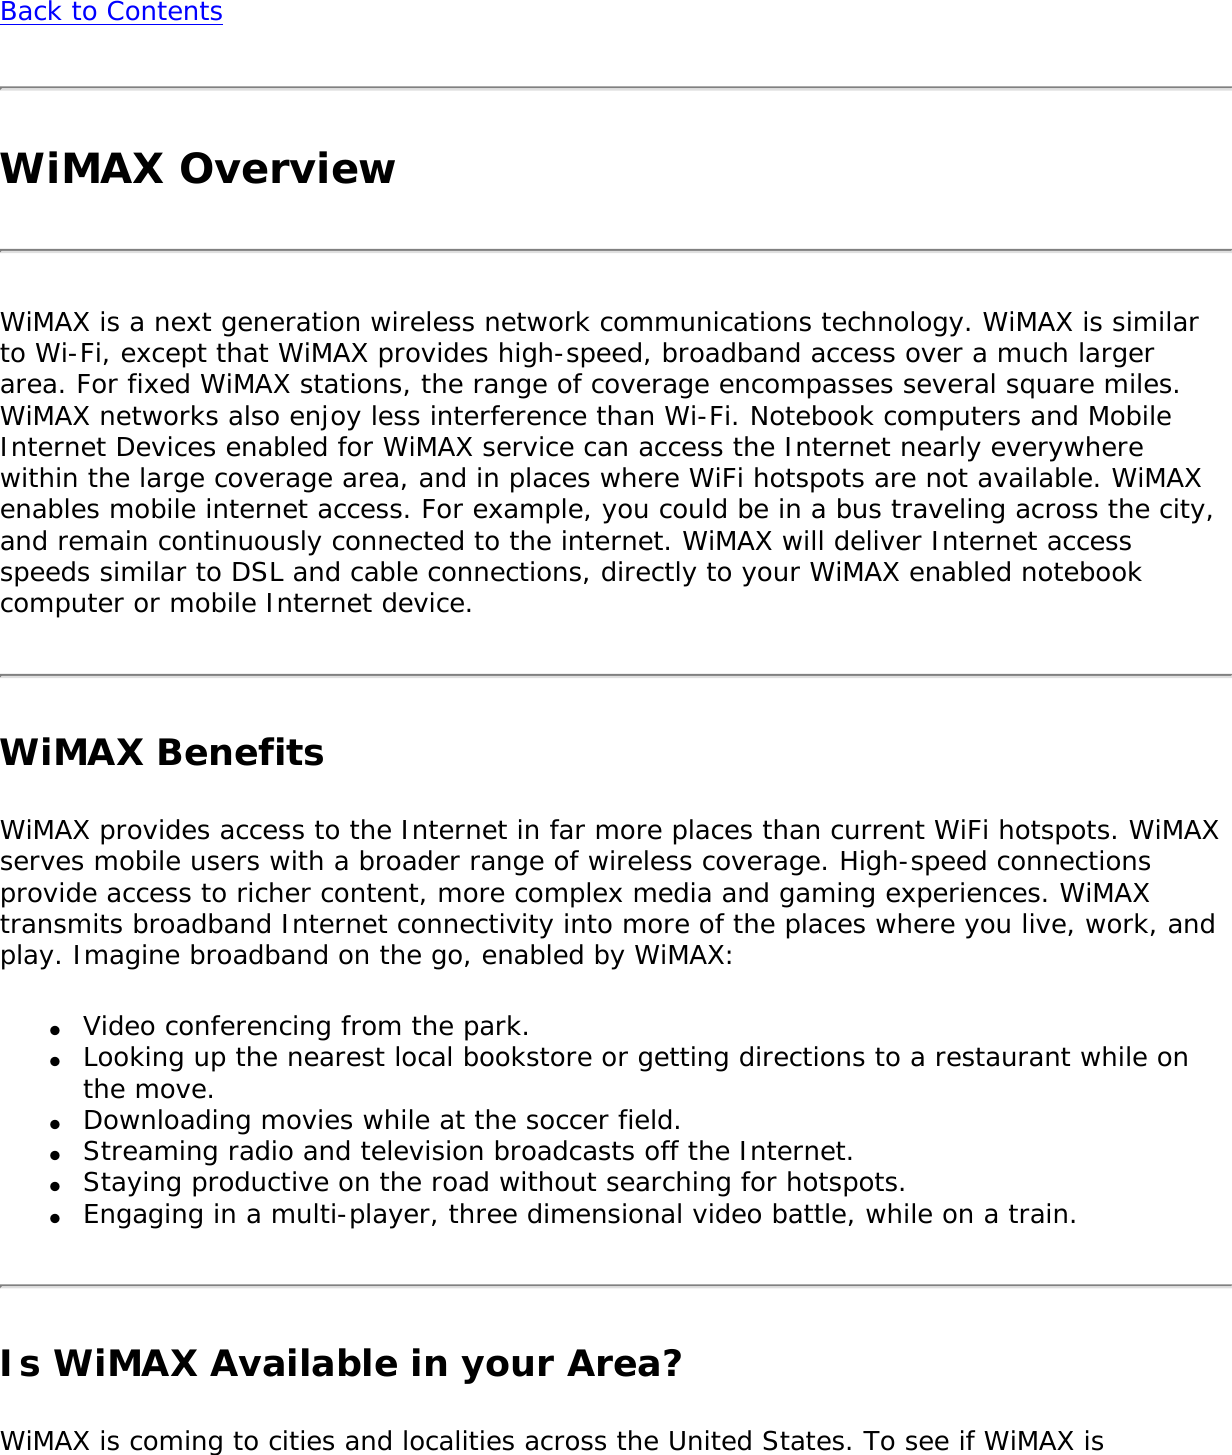 Back to ContentsWiMAX OverviewWiMAX is a next generation wireless network communications technology. WiMAX is similar to Wi-Fi, except that WiMAX provides high-speed, broadband access over a much larger area. For fixed WiMAX stations, the range of coverage encompasses several square miles. WiMAX networks also enjoy less interference than Wi-Fi. Notebook computers and Mobile Internet Devices enabled for WiMAX service can access the Internet nearly everywhere within the large coverage area, and in places where WiFi hotspots are not available. WiMAX enables mobile internet access. For example, you could be in a bus traveling across the city, and remain continuously connected to the internet. WiMAX will deliver Internet access speeds similar to DSL and cable connections, directly to your WiMAX enabled notebook computer or mobile Internet device. WiMAX BenefitsWiMAX provides access to the Internet in far more places than current WiFi hotspots. WiMAX serves mobile users with a broader range of wireless coverage. High-speed connections provide access to richer content, more complex media and gaming experiences. WiMAX transmits broadband Internet connectivity into more of the places where you live, work, and play. Imagine broadband on the go, enabled by WiMAX: ●     Video conferencing from the park. ●     Looking up the nearest local bookstore or getting directions to a restaurant while on the move.●     Downloading movies while at the soccer field.●     Streaming radio and television broadcasts off the Internet.●     Staying productive on the road without searching for hotspots. ●     Engaging in a multi-player, three dimensional video battle, while on a train.Is WiMAX Available in your Area? WiMAX is coming to cities and localities across the United States. To see if WiMAX is 